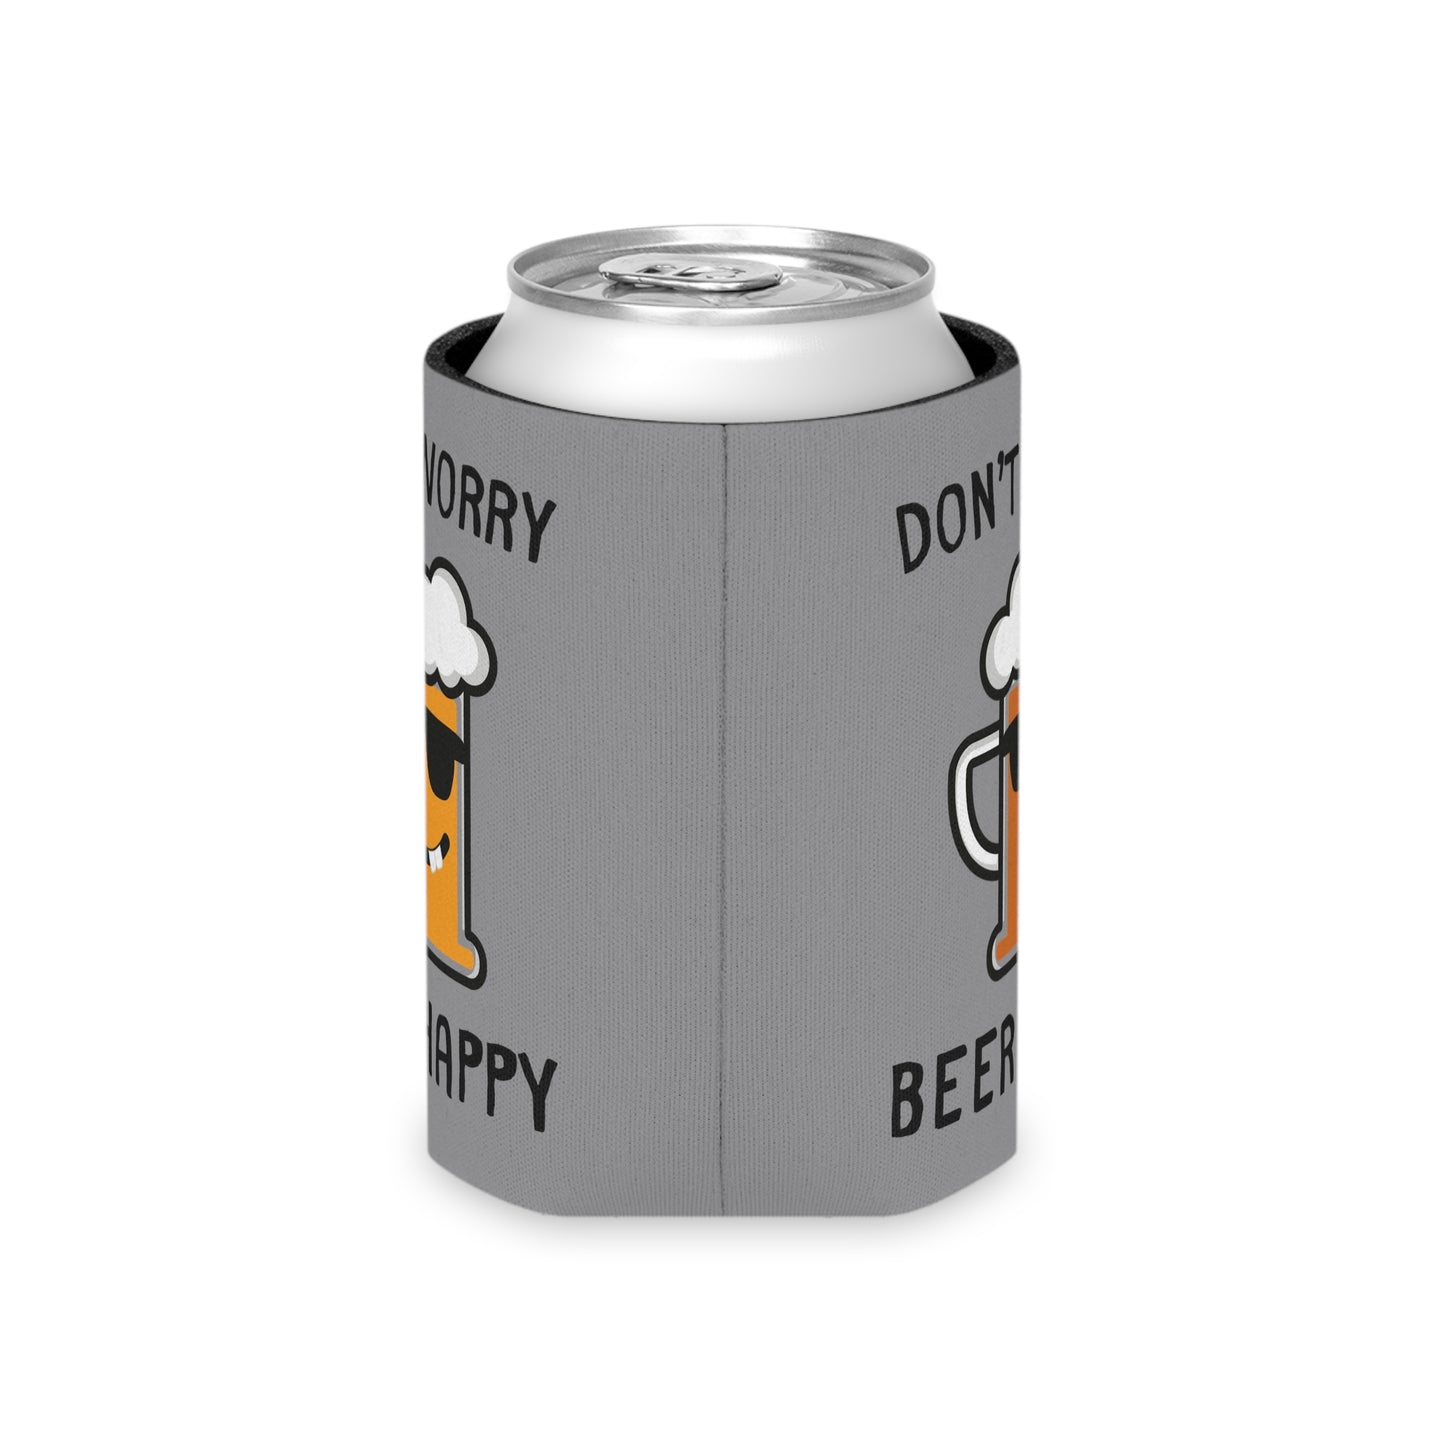 "Don't Worry, Beer Happy" Can Cooler - Weave Got Gifts - Unique Gifts You Won’t Find Anywhere Else!